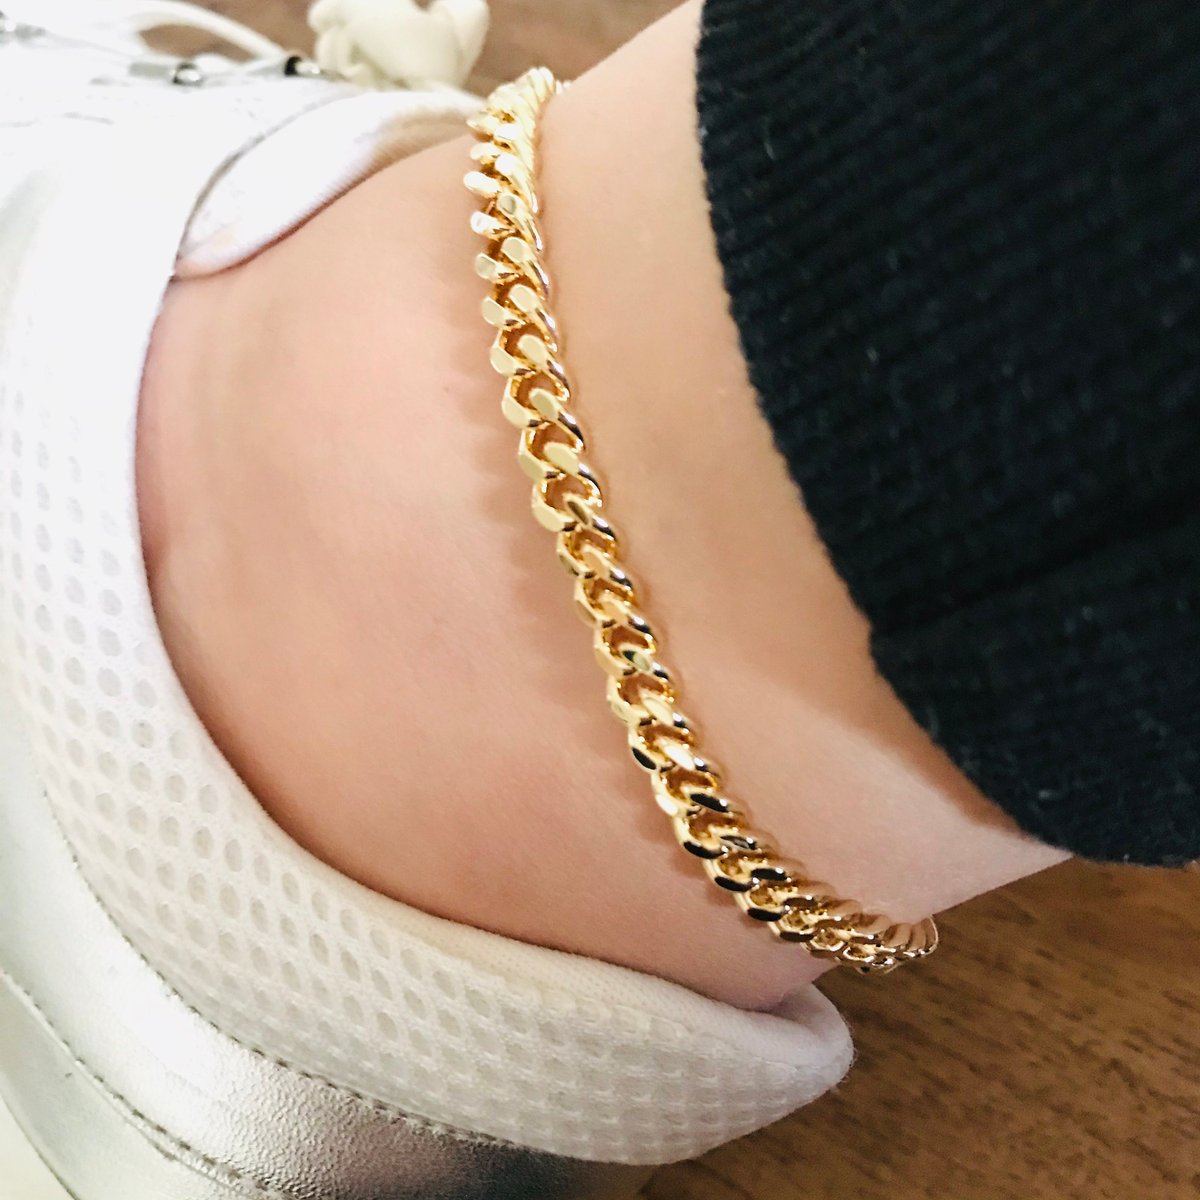 Excited to share the latest addition to my #etsy shop: Thick Chain Anklet, 18K Gold Filled Curb Link Anklet, Gold Anklet for Women, Chunky Cuban Link Chain Anklet, Thick Gold Anklet Bracelet etsy.me/3qH8uly #summeranklet #summerjewelry #chunkyanklet